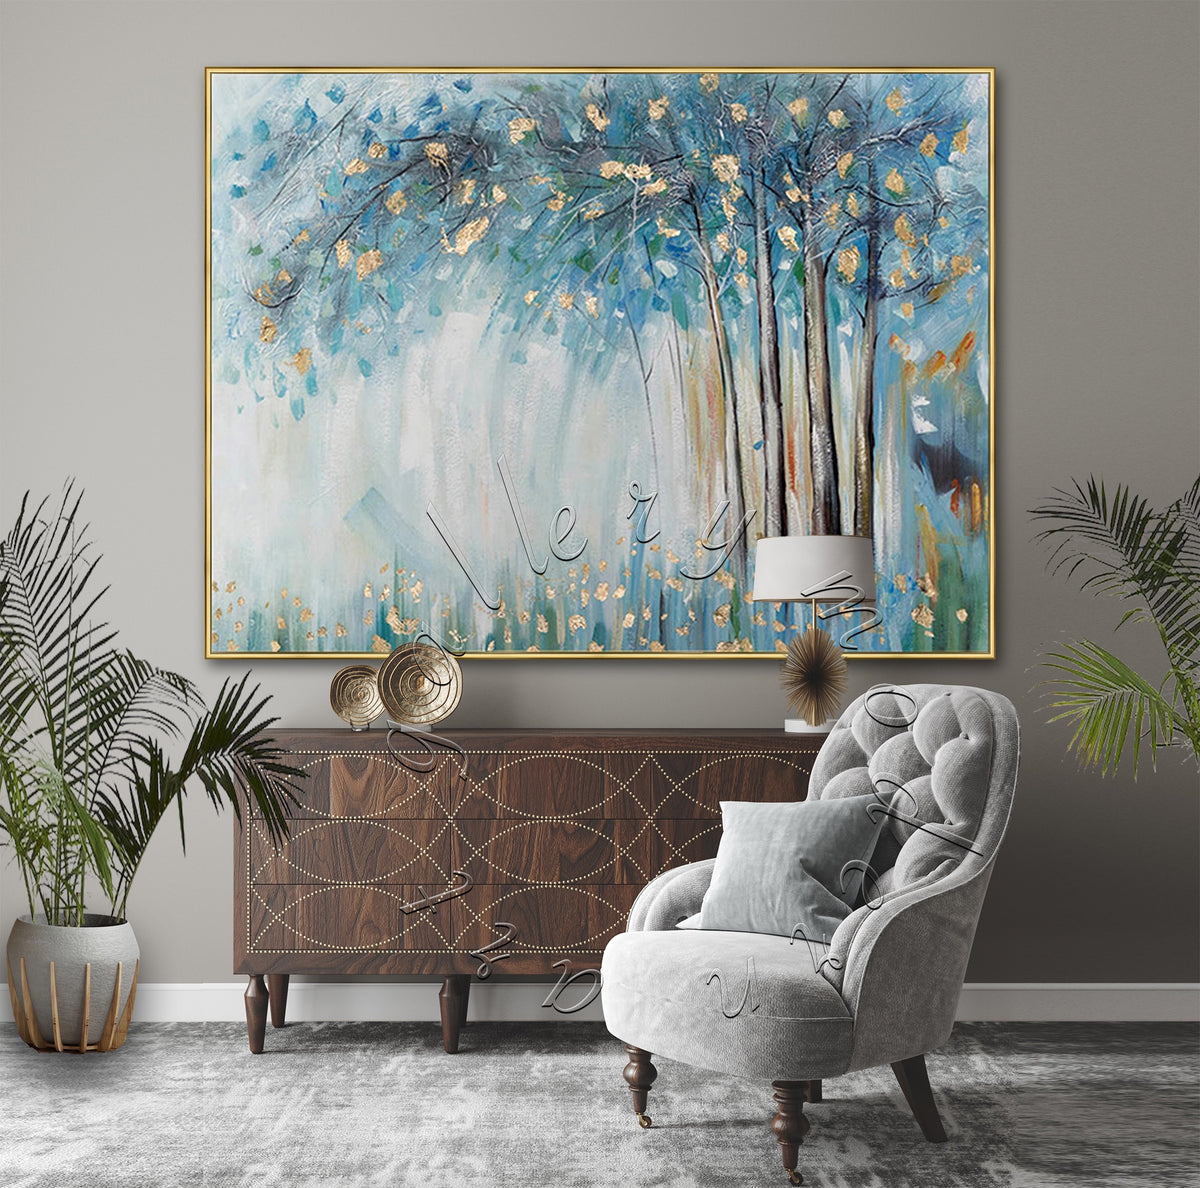 Gold Leaf Landscape Abstract Original Painting, Gold, White and Blue Trees